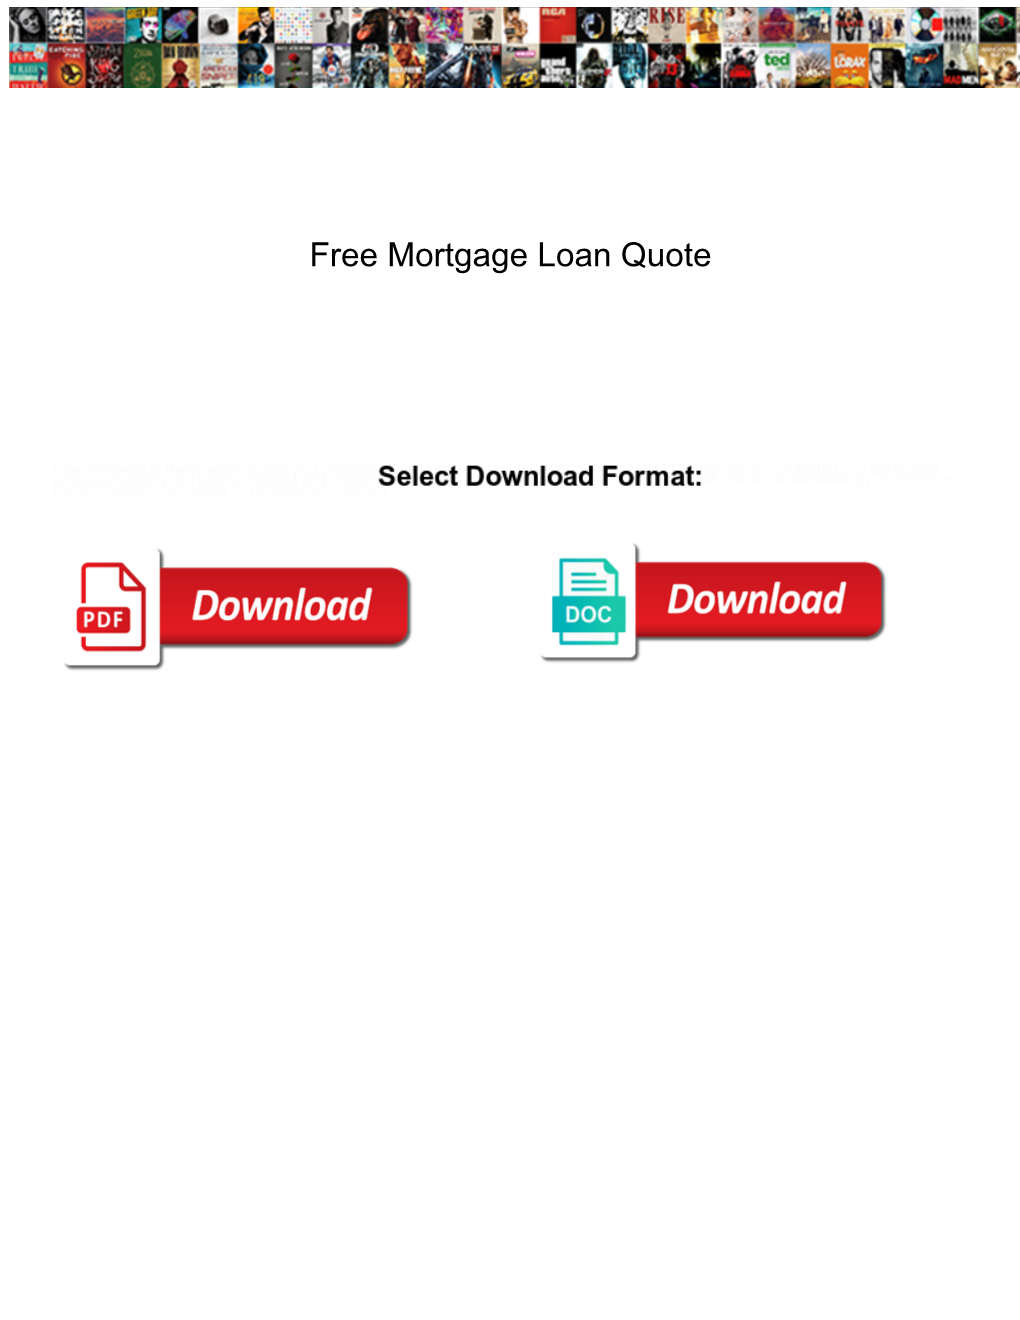 Free Mortgage Loan Quote